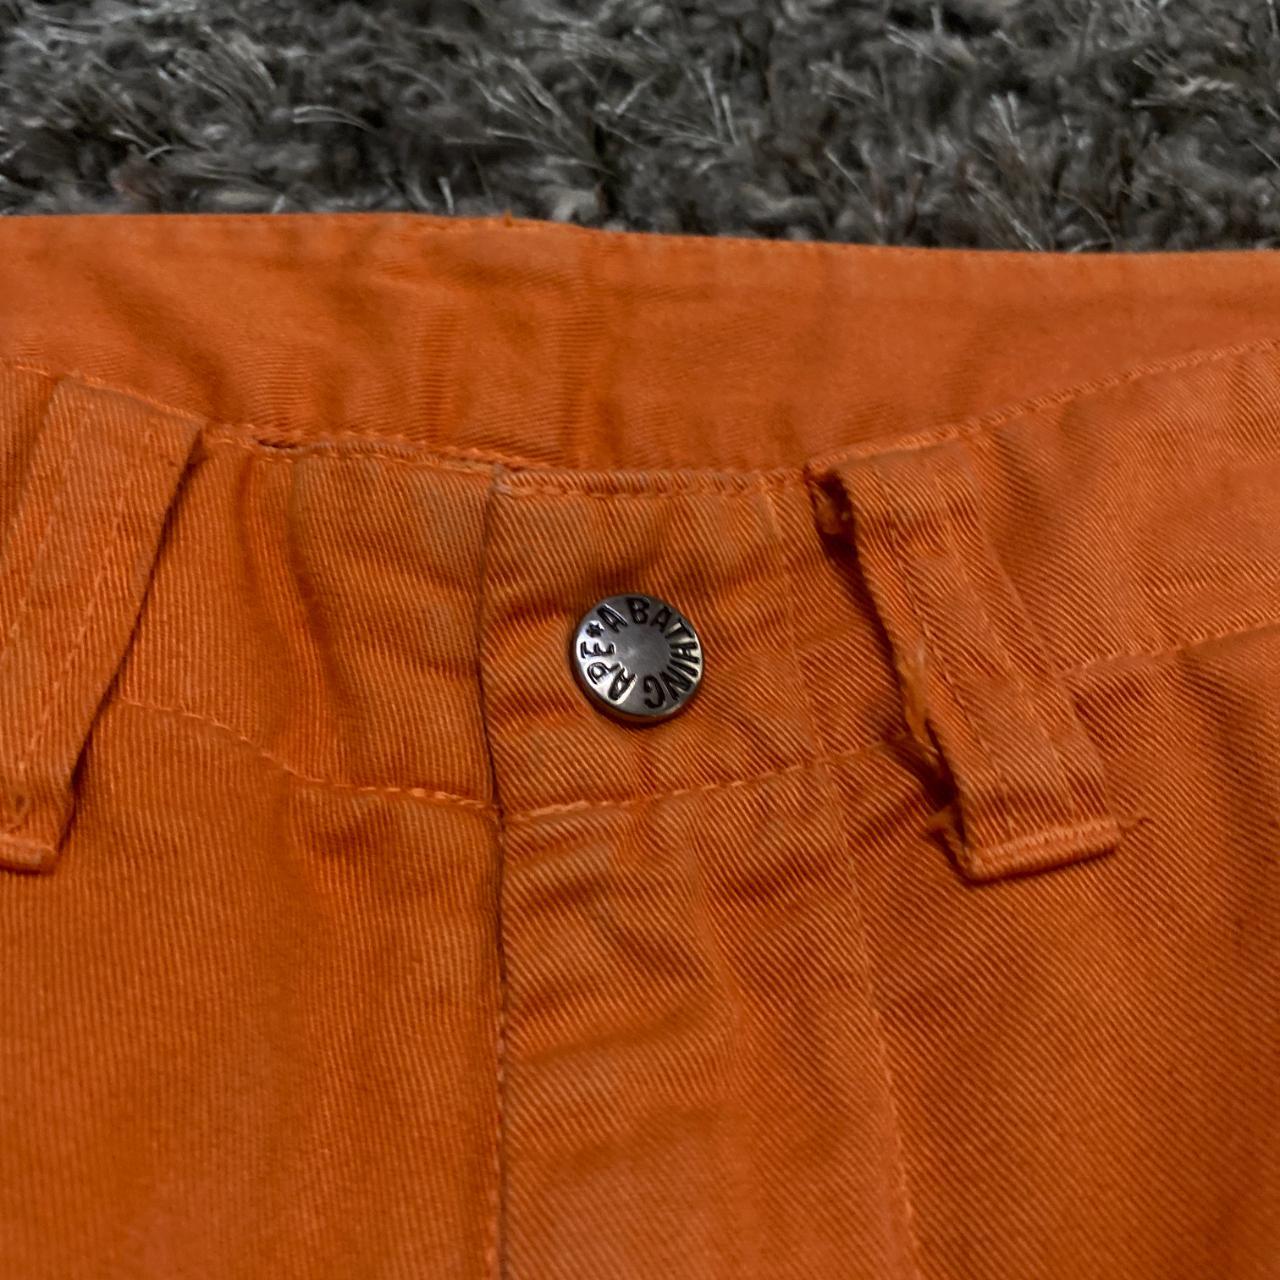 Bape Spell Out Chino Shorts Orange Large Great... - Depop